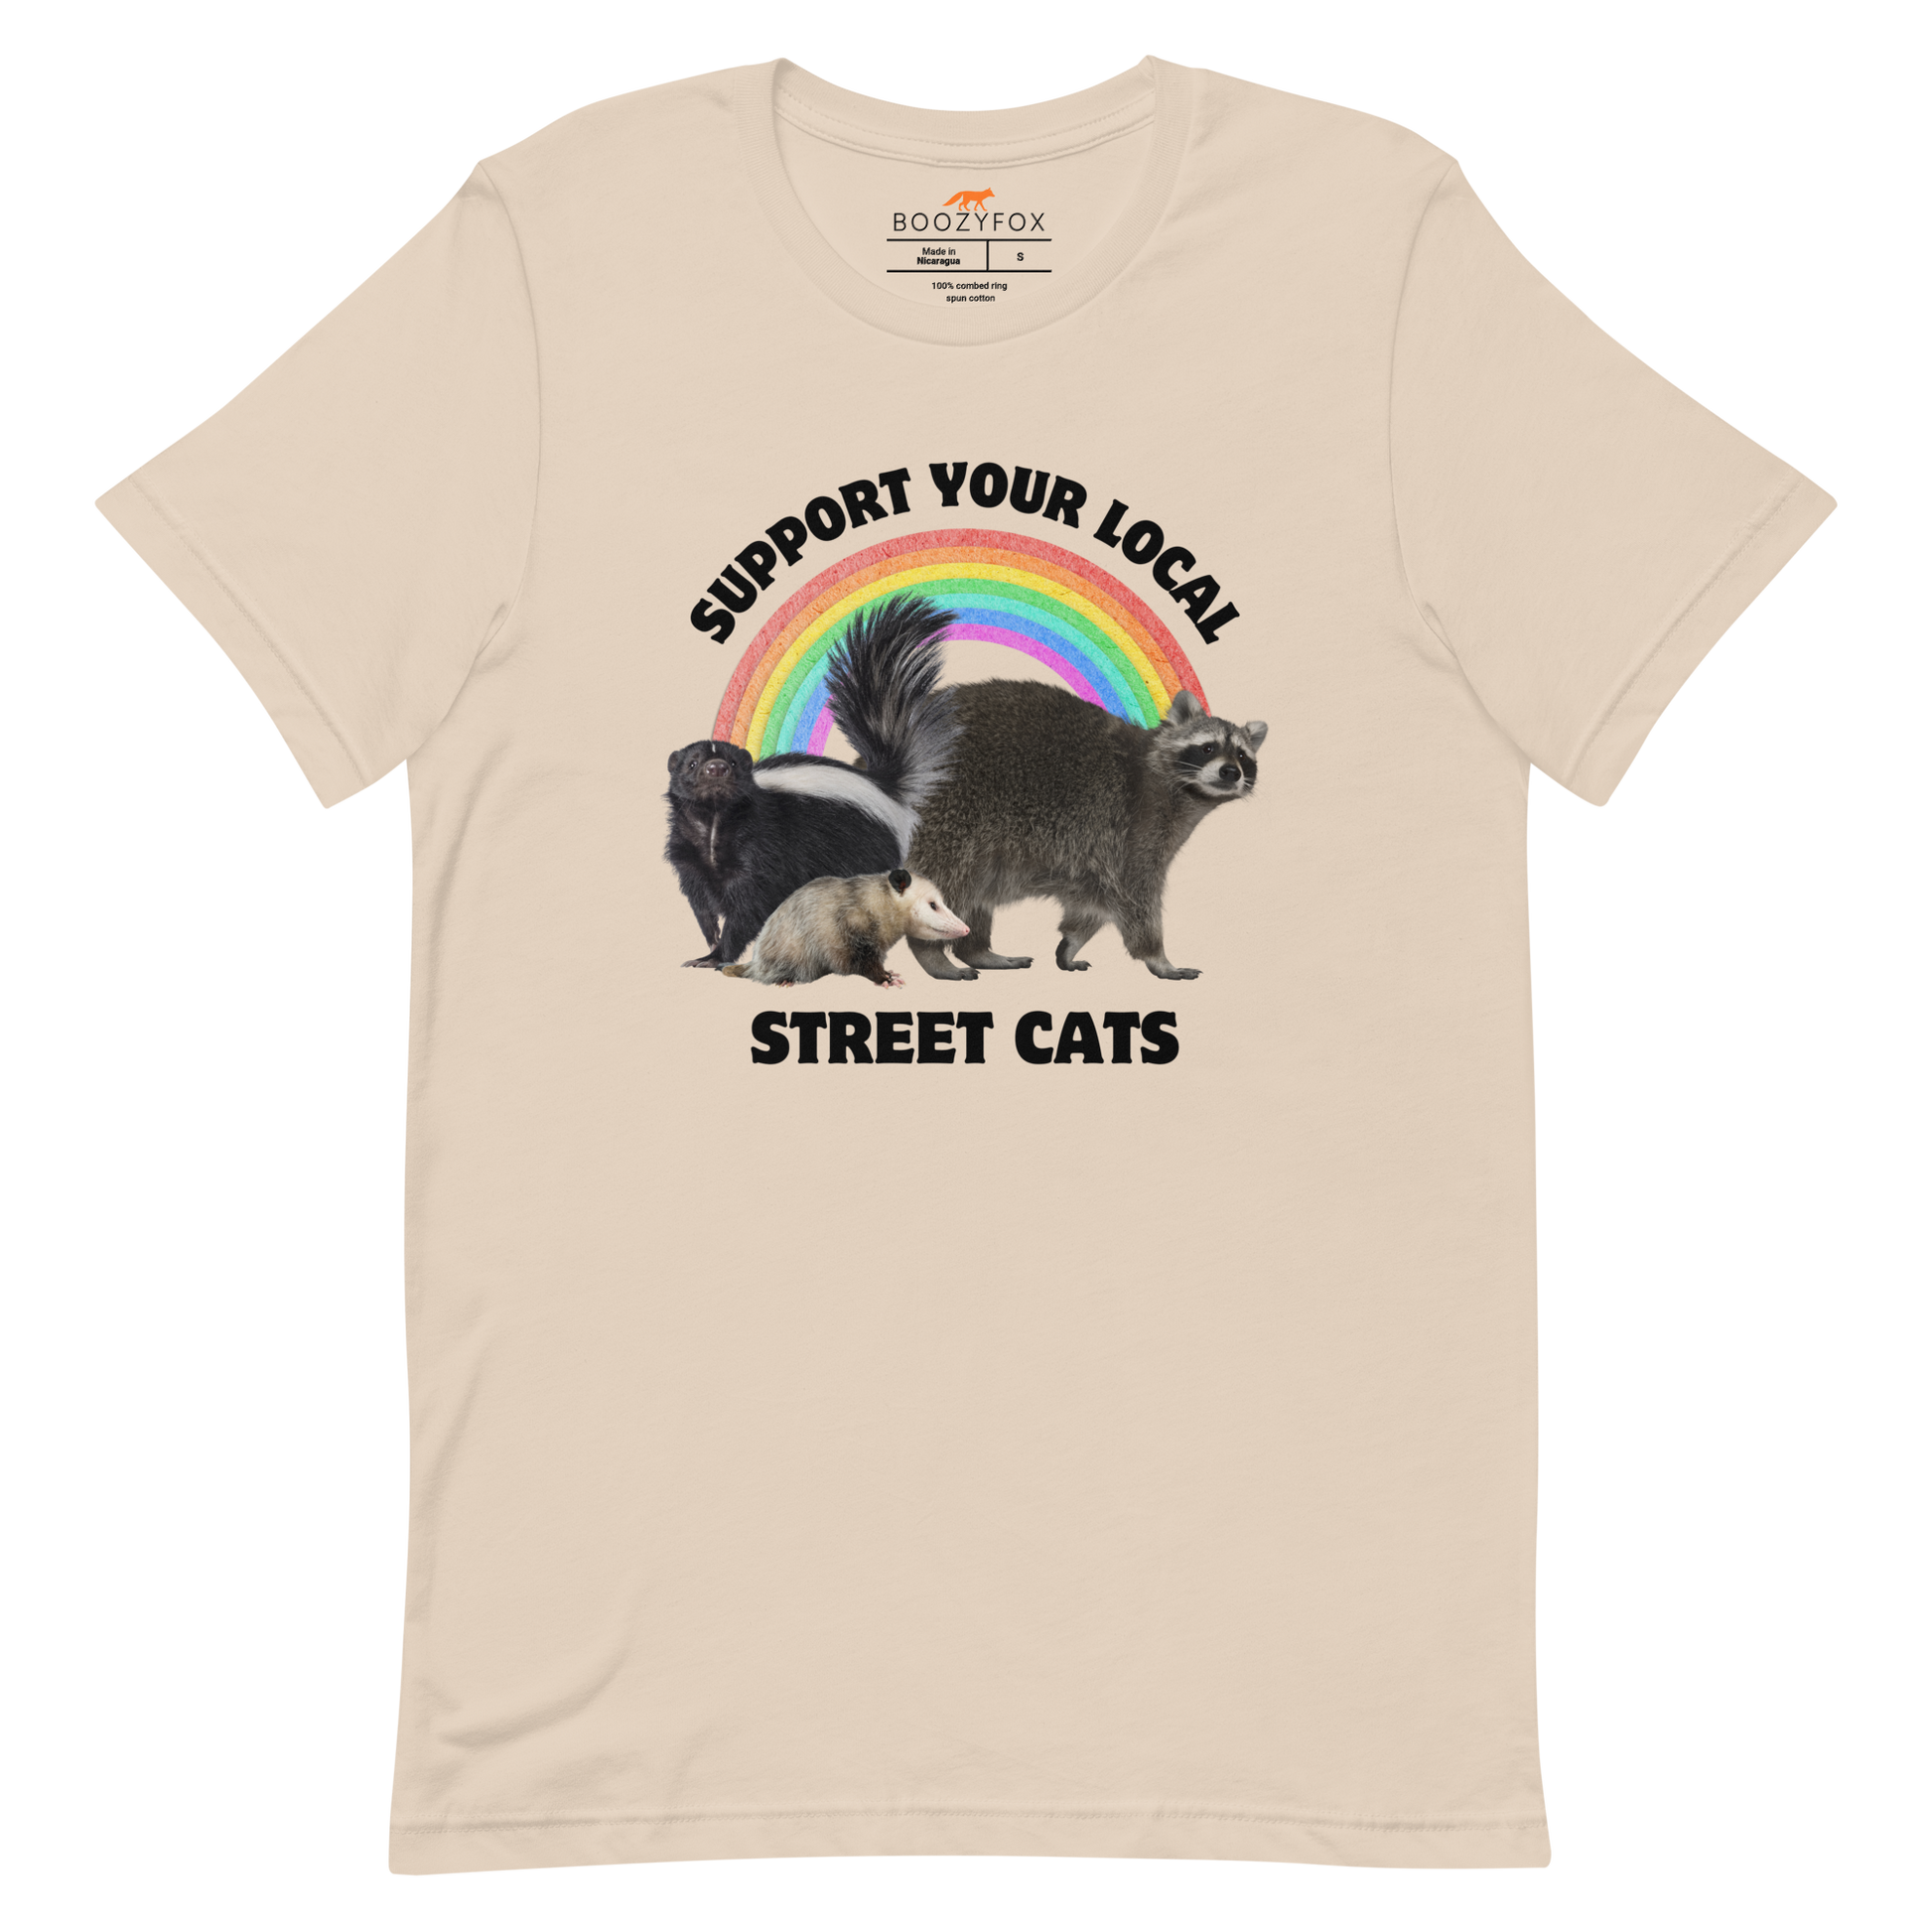 Soft Cream Premium Street Cats Tee featuring a funny 'Support Your Local Street Cats' graphic on the chest - Funny Graphic Animal Tees - Boozy Fox